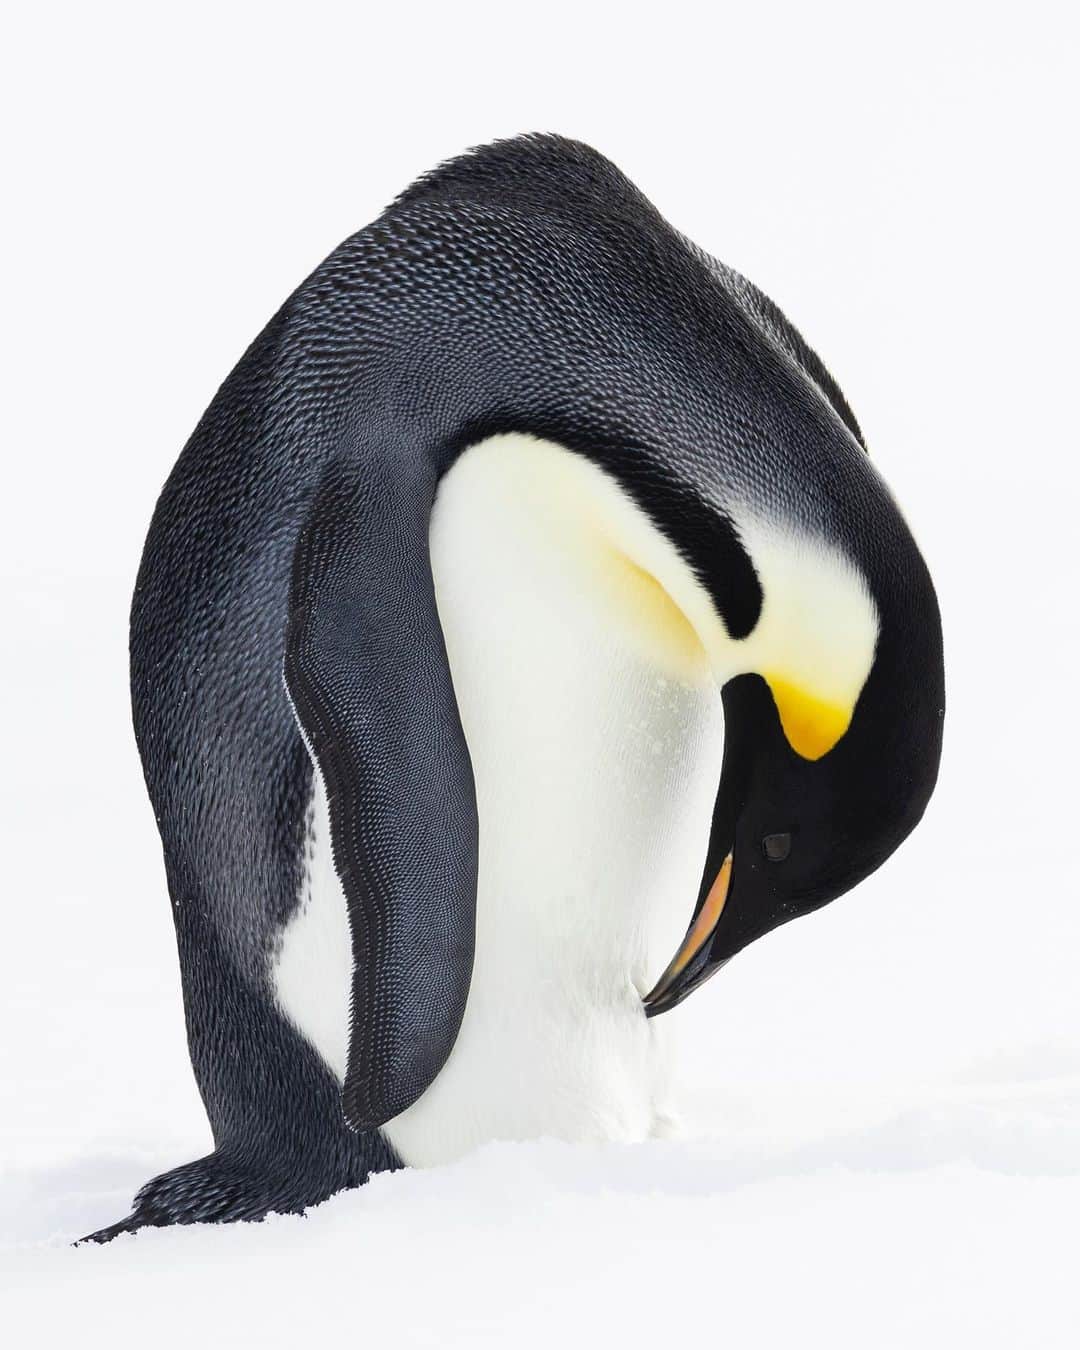 Tim Lamanのインスタグラム：「Photo by @TimLaman.  A preening Emperor Penguin.  Emperor Penguins were one of the highlights of my recent Antarctica voyage!  Join my newsletter (coming soon) at my link in bio for more photos and stories from my adventures.  #emperorpenguin #penguin #antarctica #birds #birdphotography」